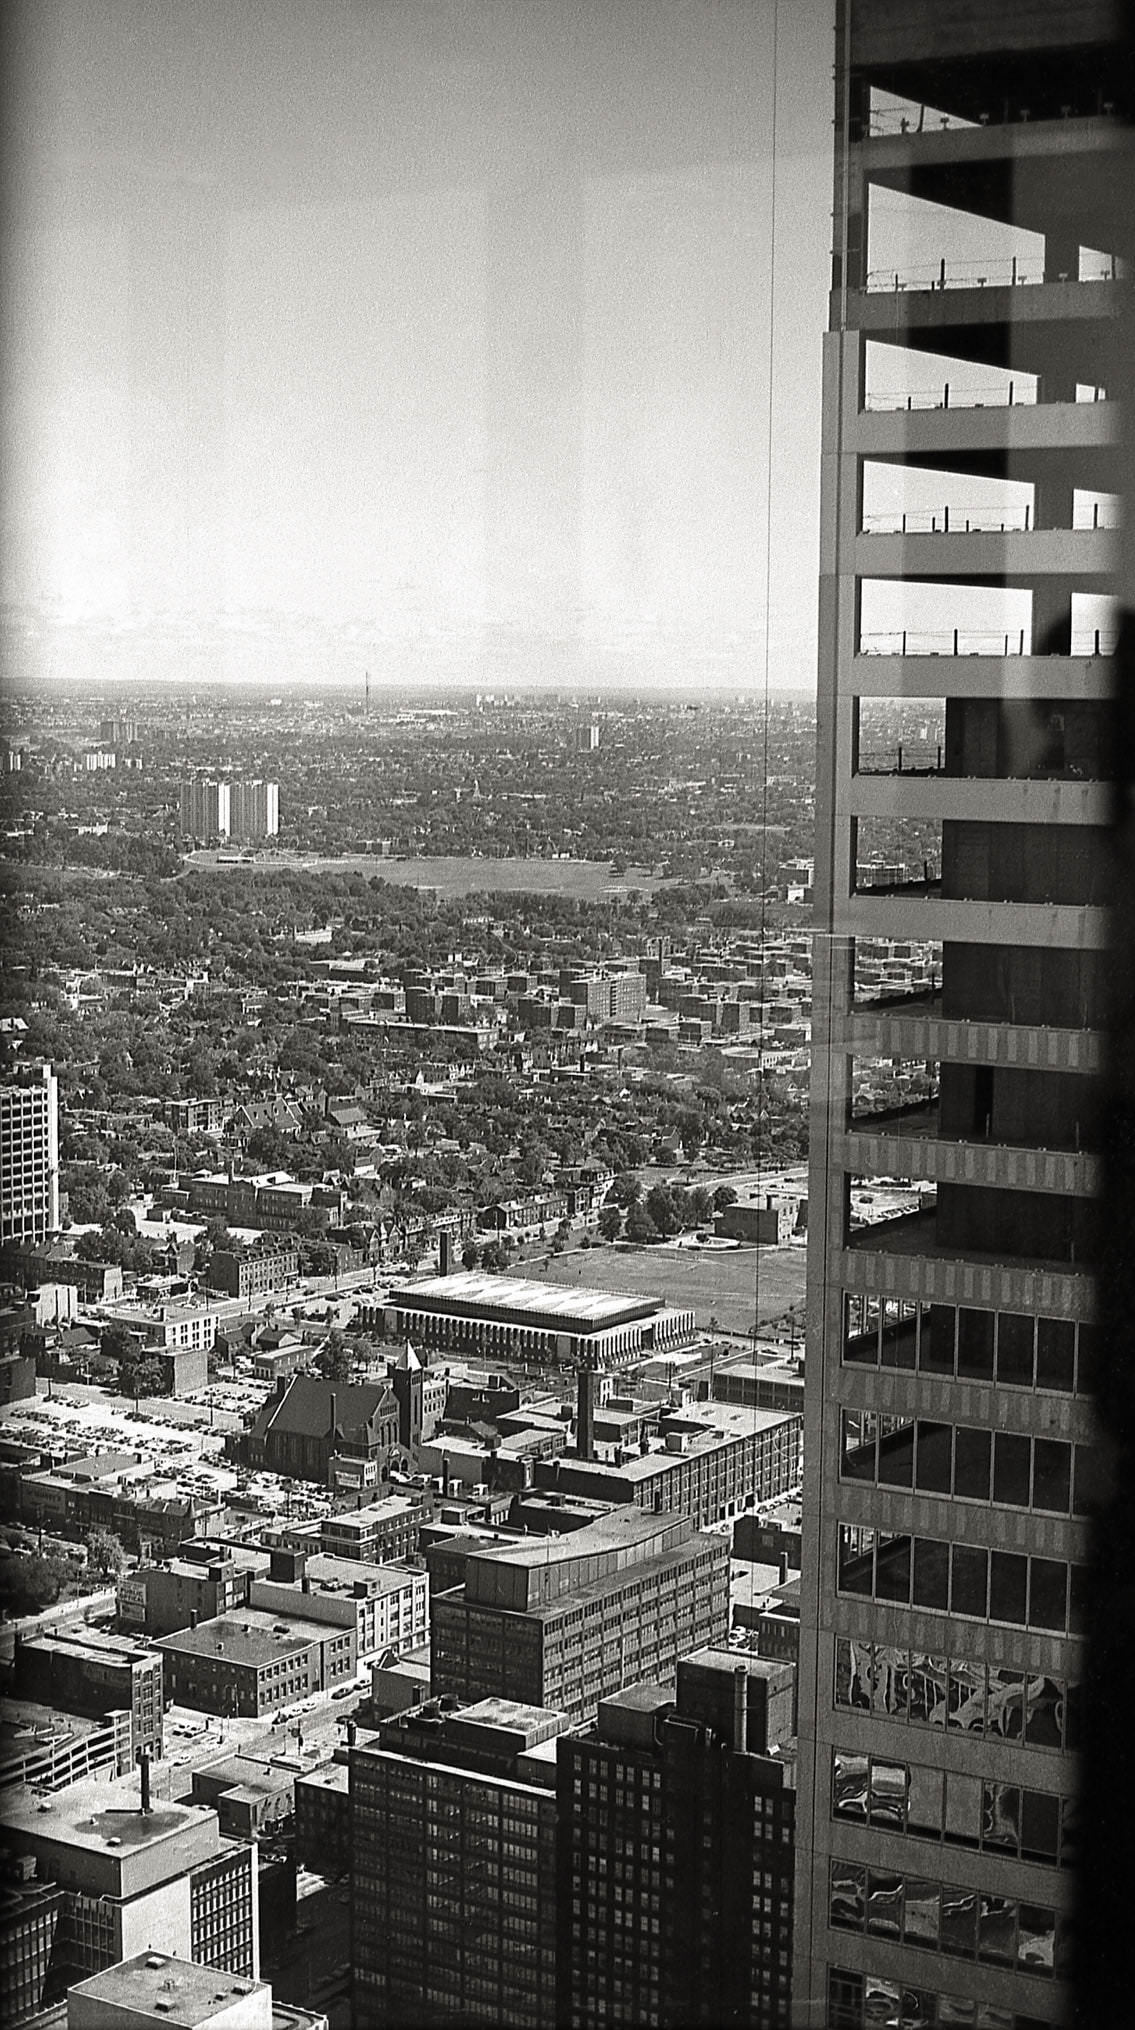 A view looking north east from the TD Centre, 1971.